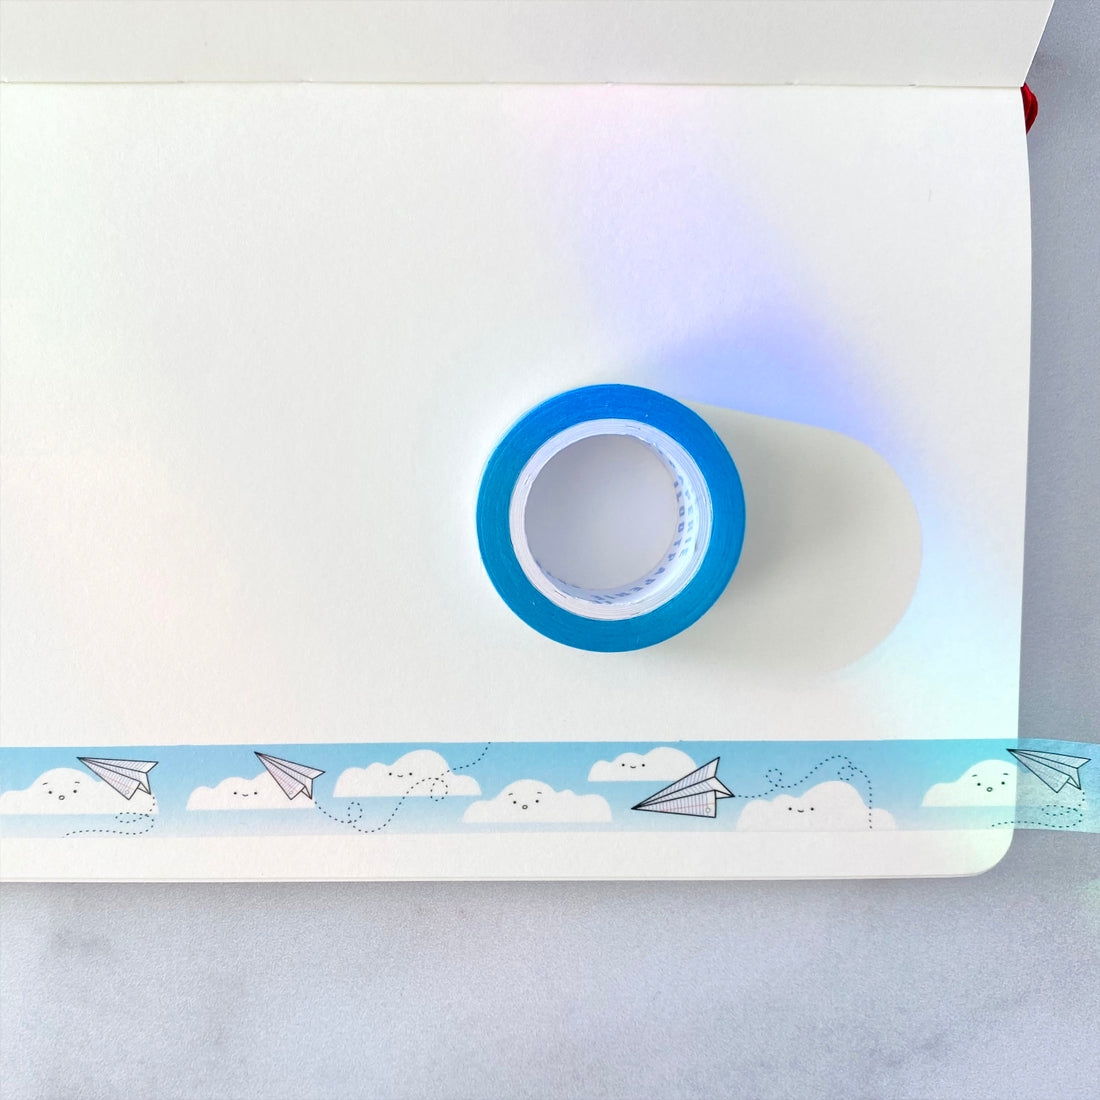 Decorative tape with blue sky background with images of white clouds and white paper airplanes zipping through the air. 